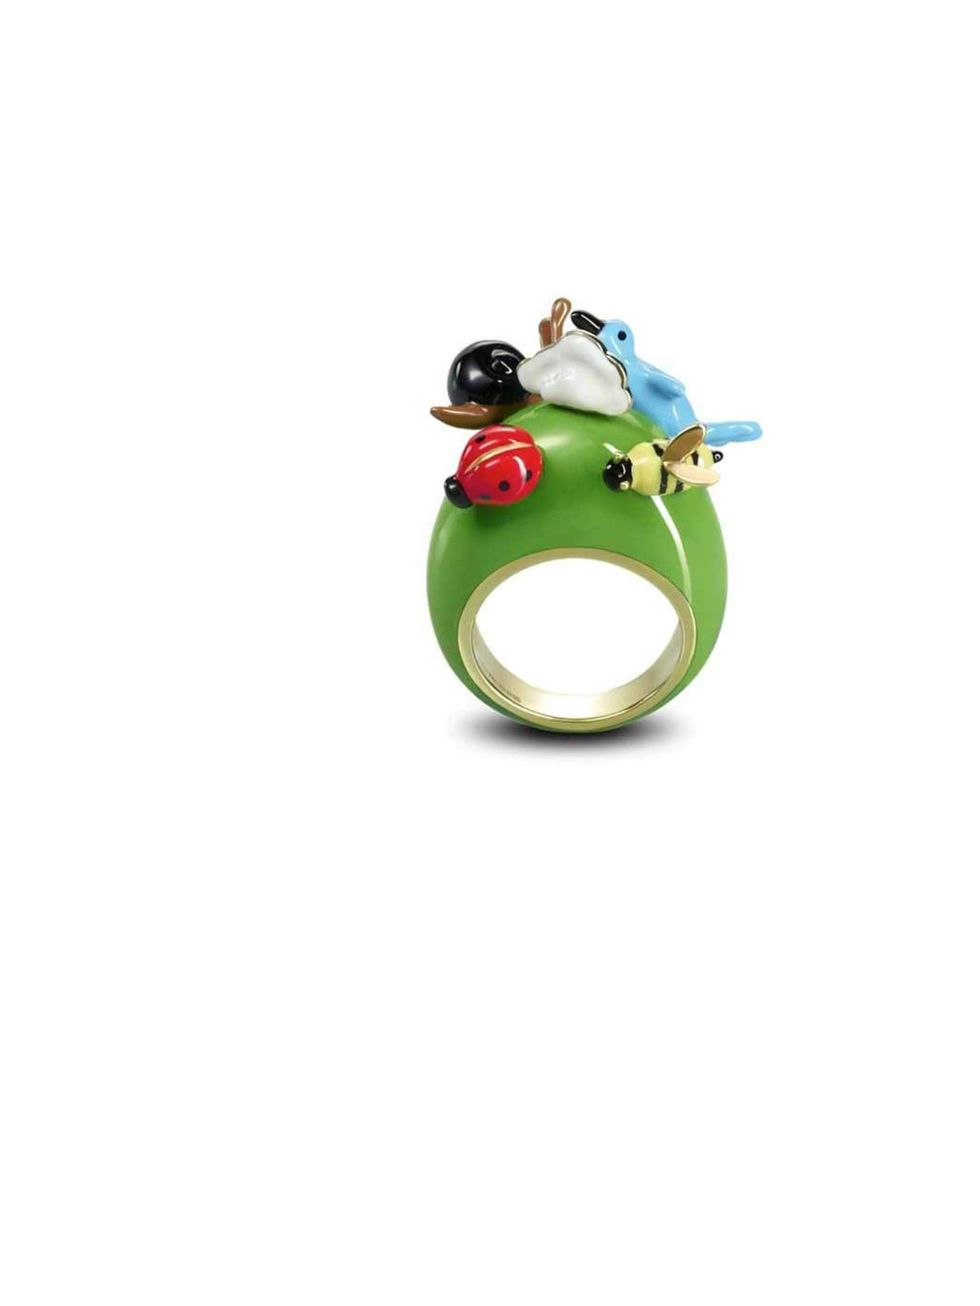 <p>If anyone is thinking of buying me a present, this is it</p><p><a href="http://www.solange.co.uk/enamel/787-supernature-ring-.html">Solange Azagury-Partridge</a> Supernature ring</p>